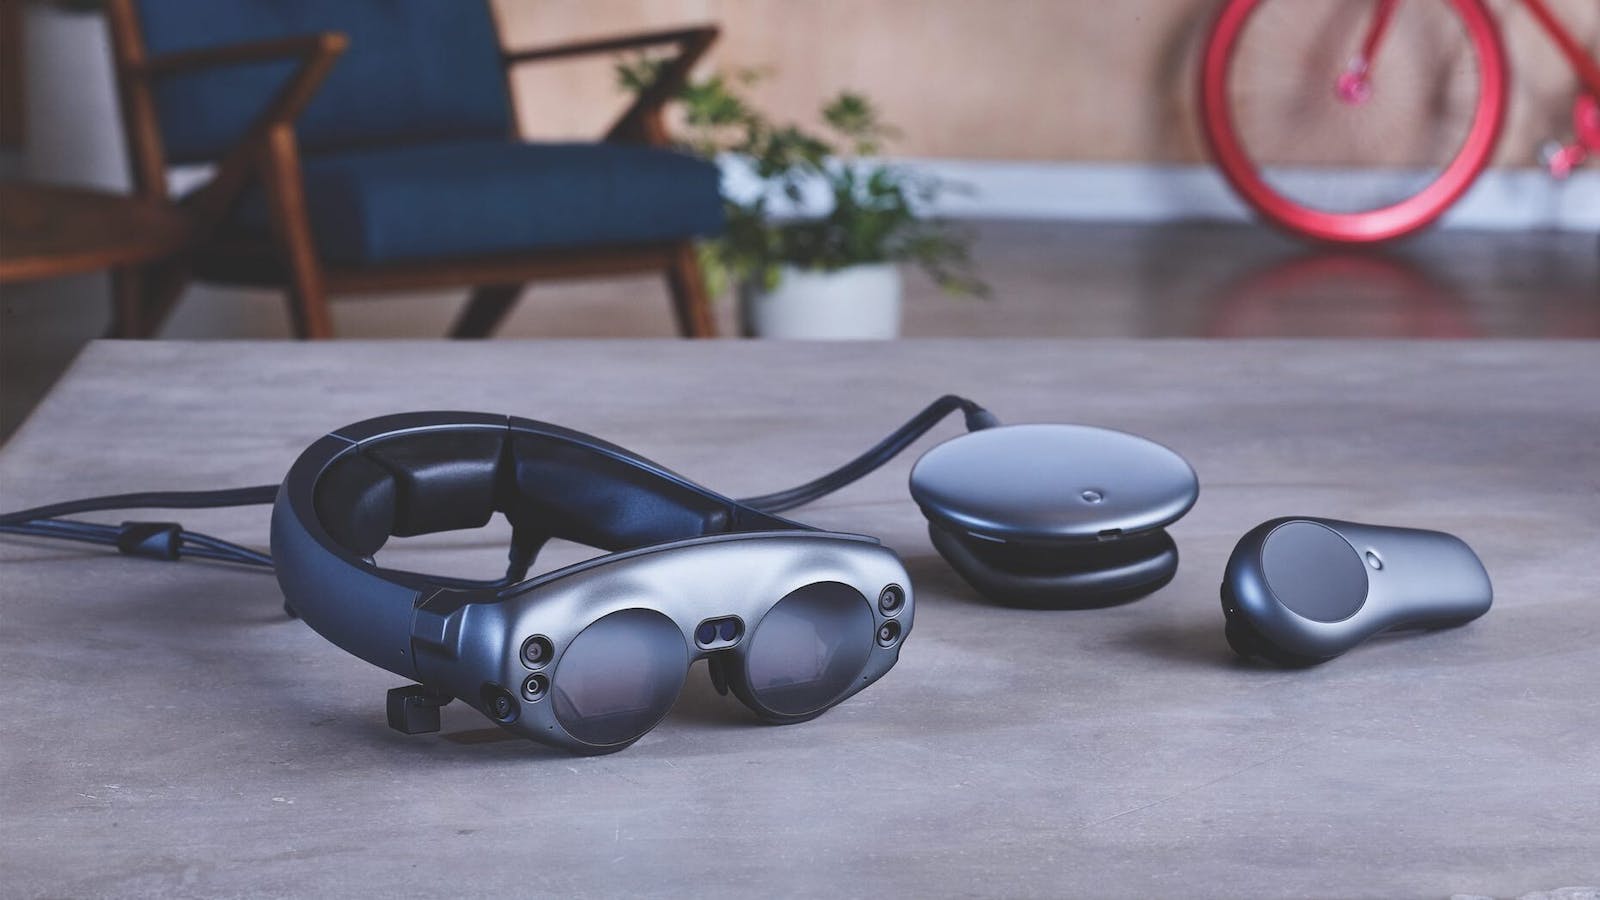 The Magic Leap 1 headset, wearable computer accessory and controller. Source: Magic Leap